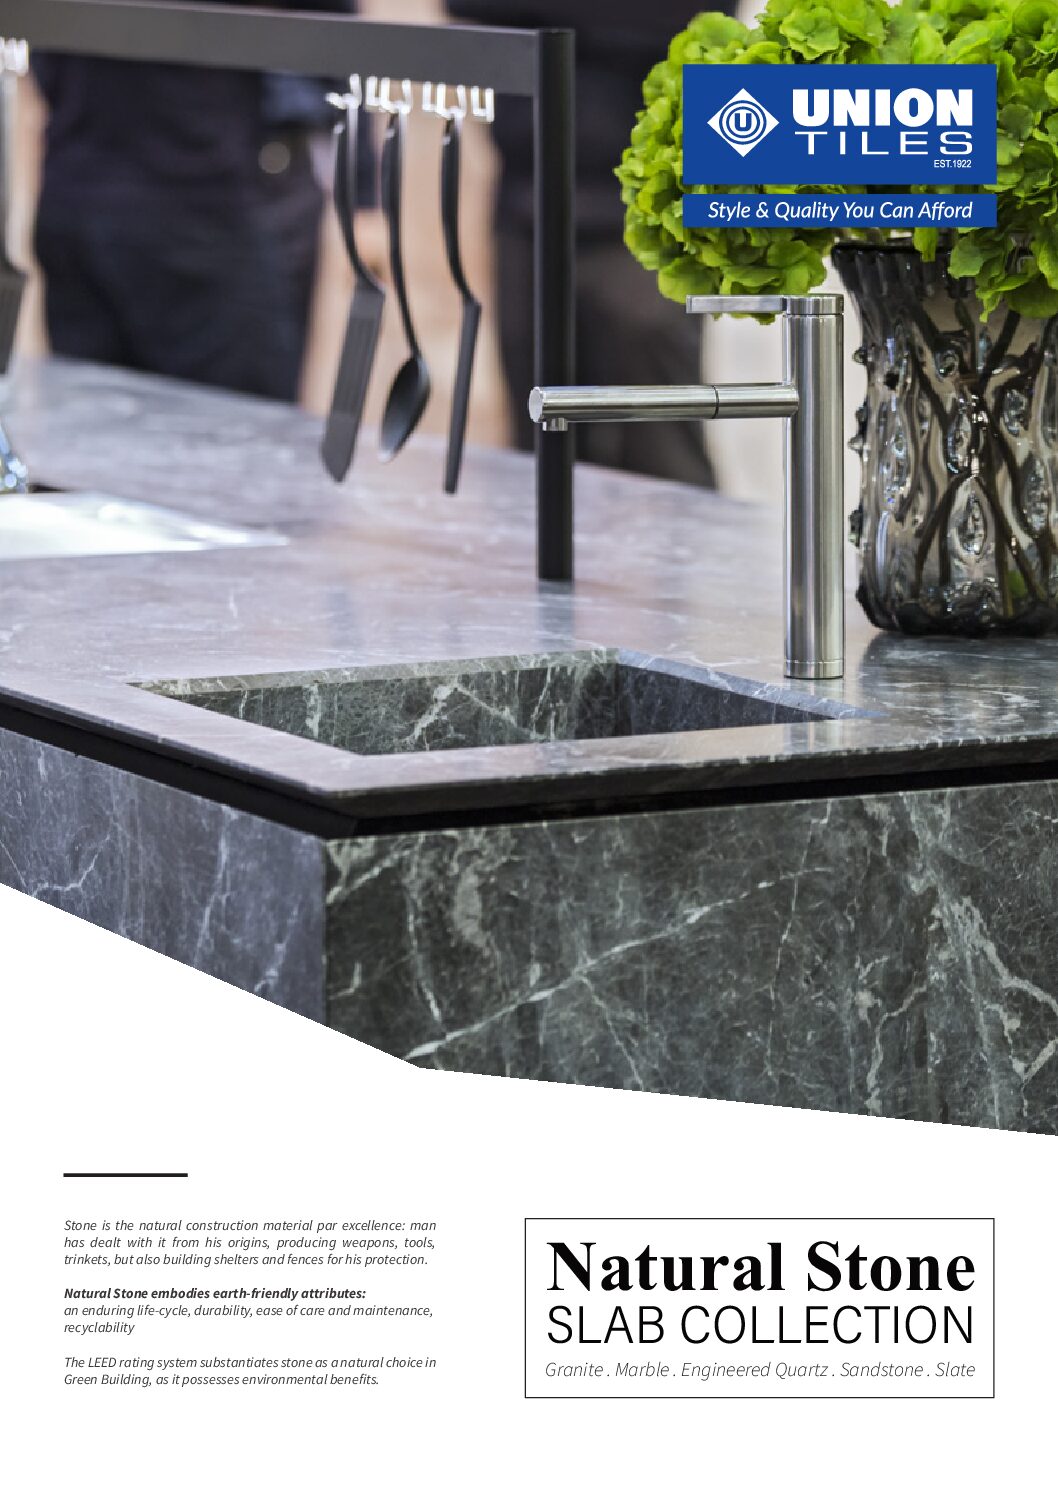 Union Tiles Natural Stone Slab Collection Brochure